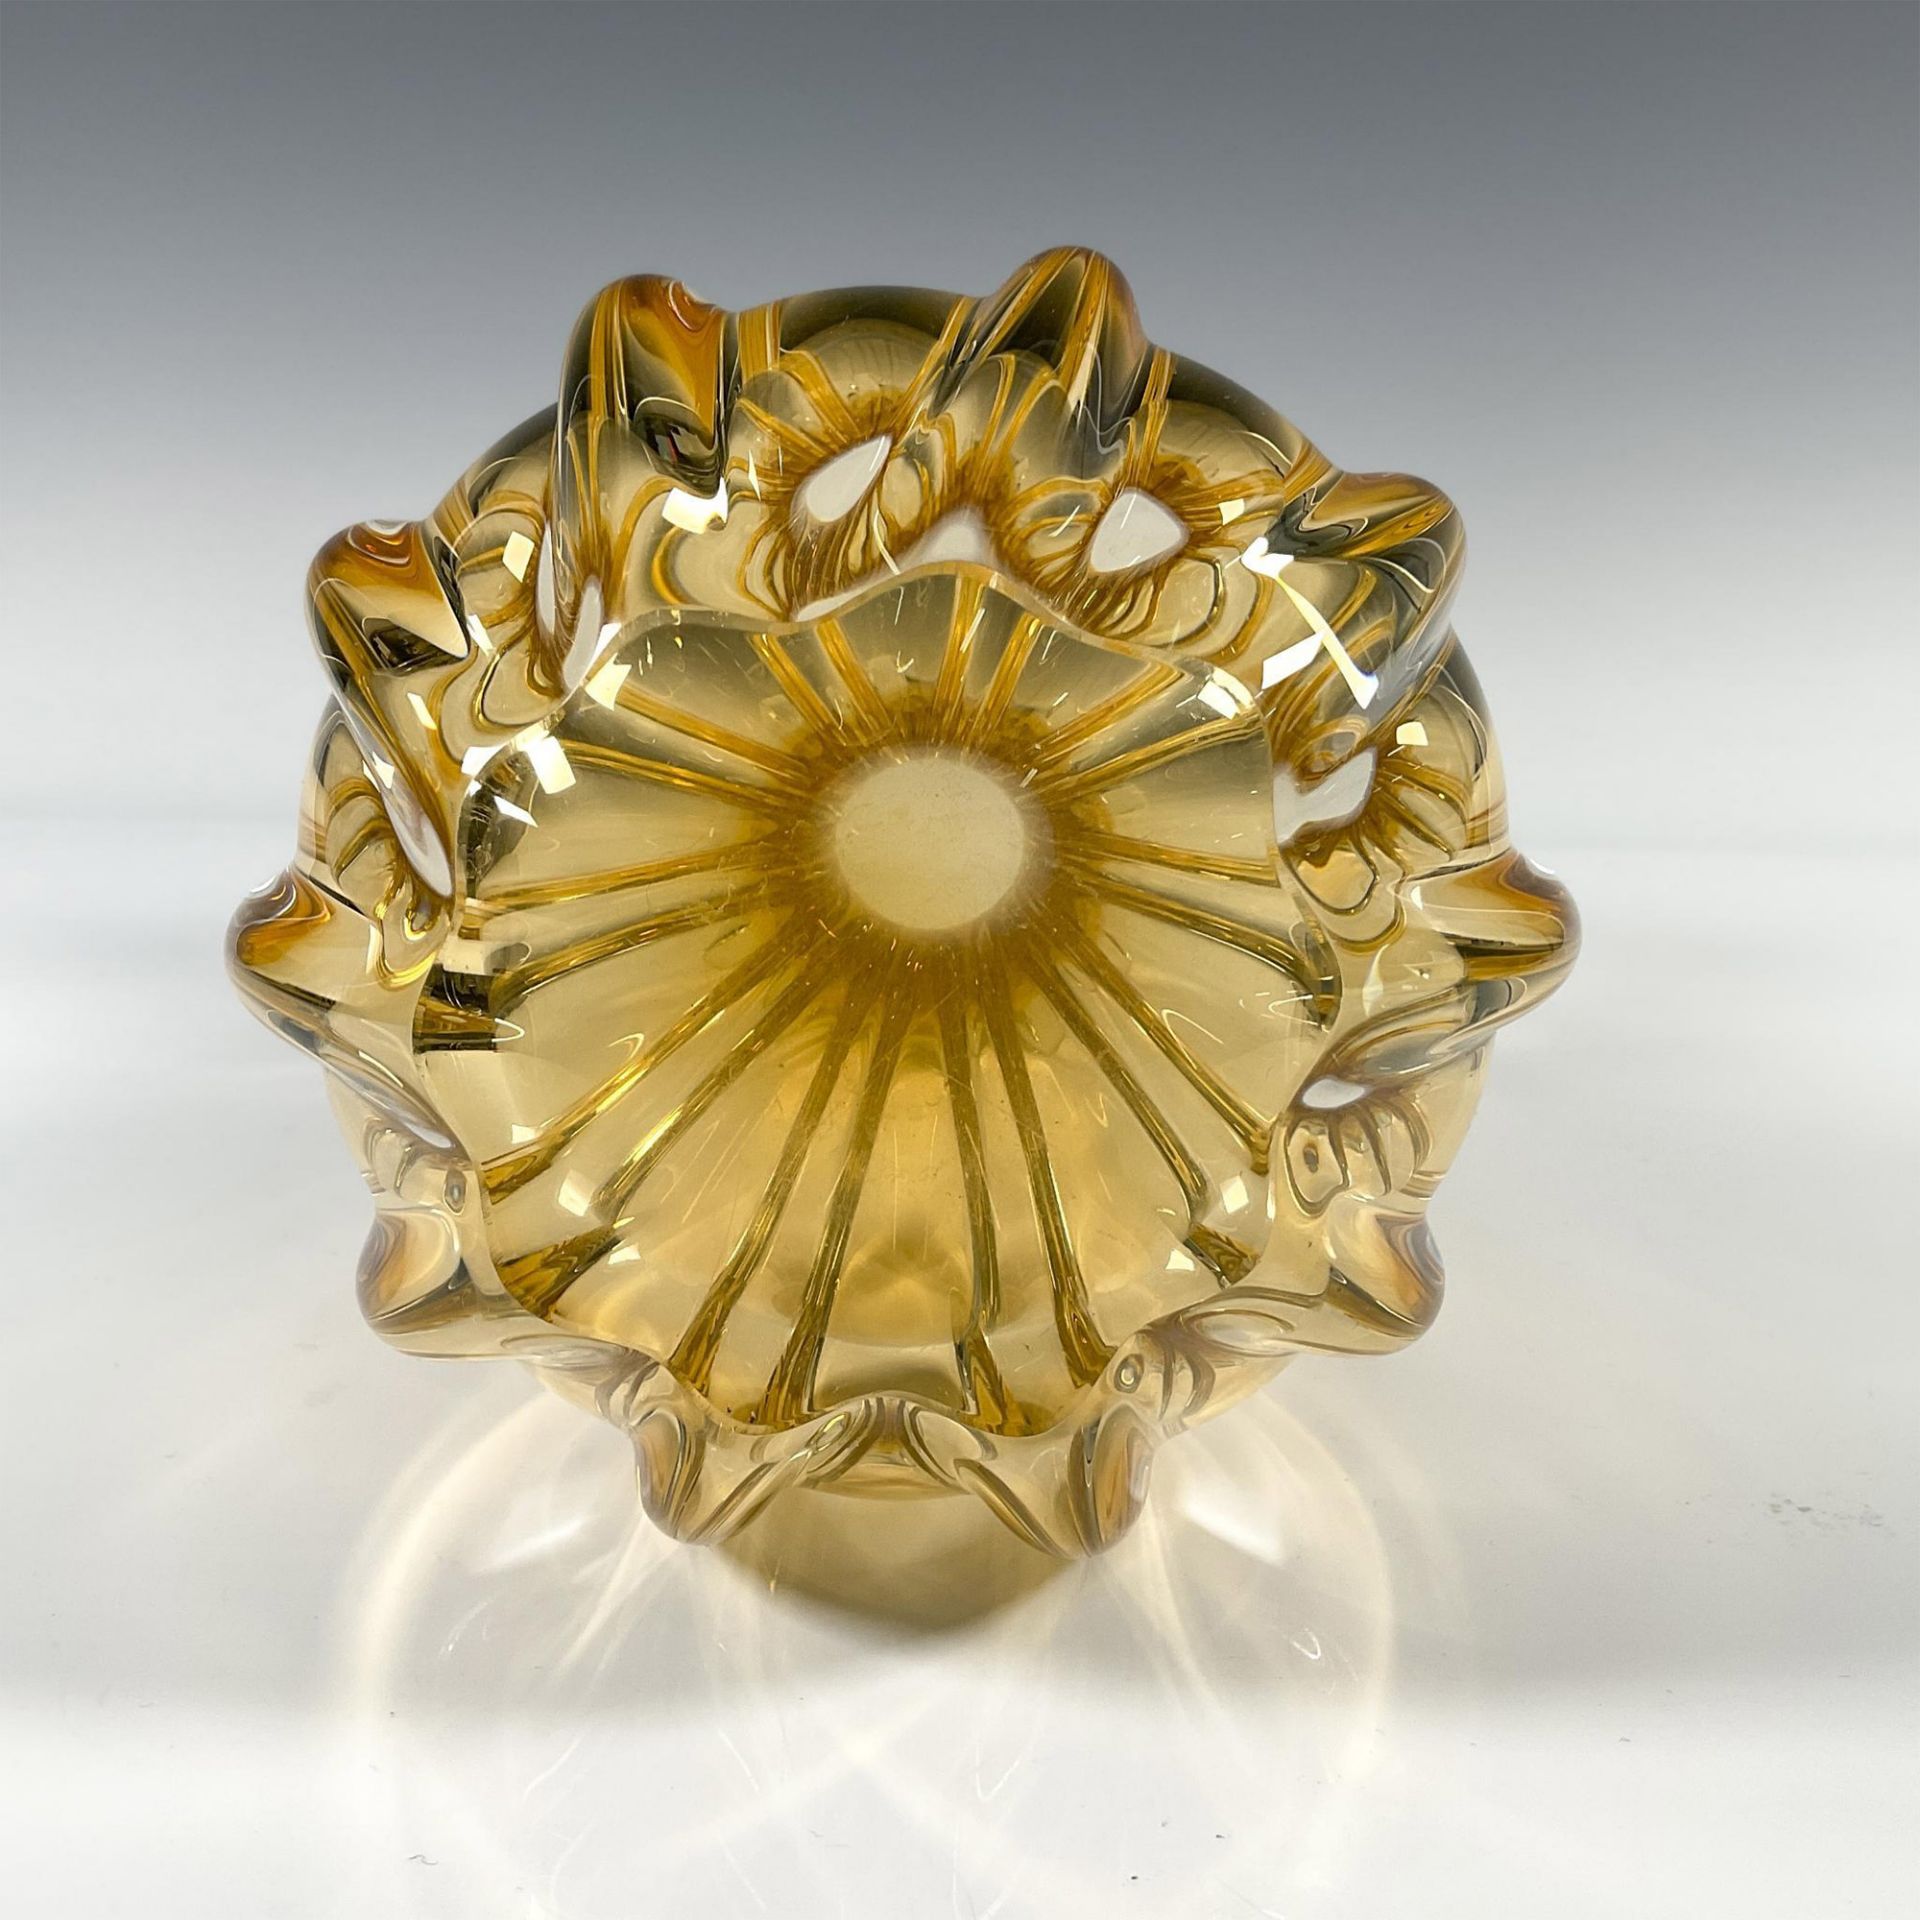 Amber Colored Crystal Vase - Image 3 of 3